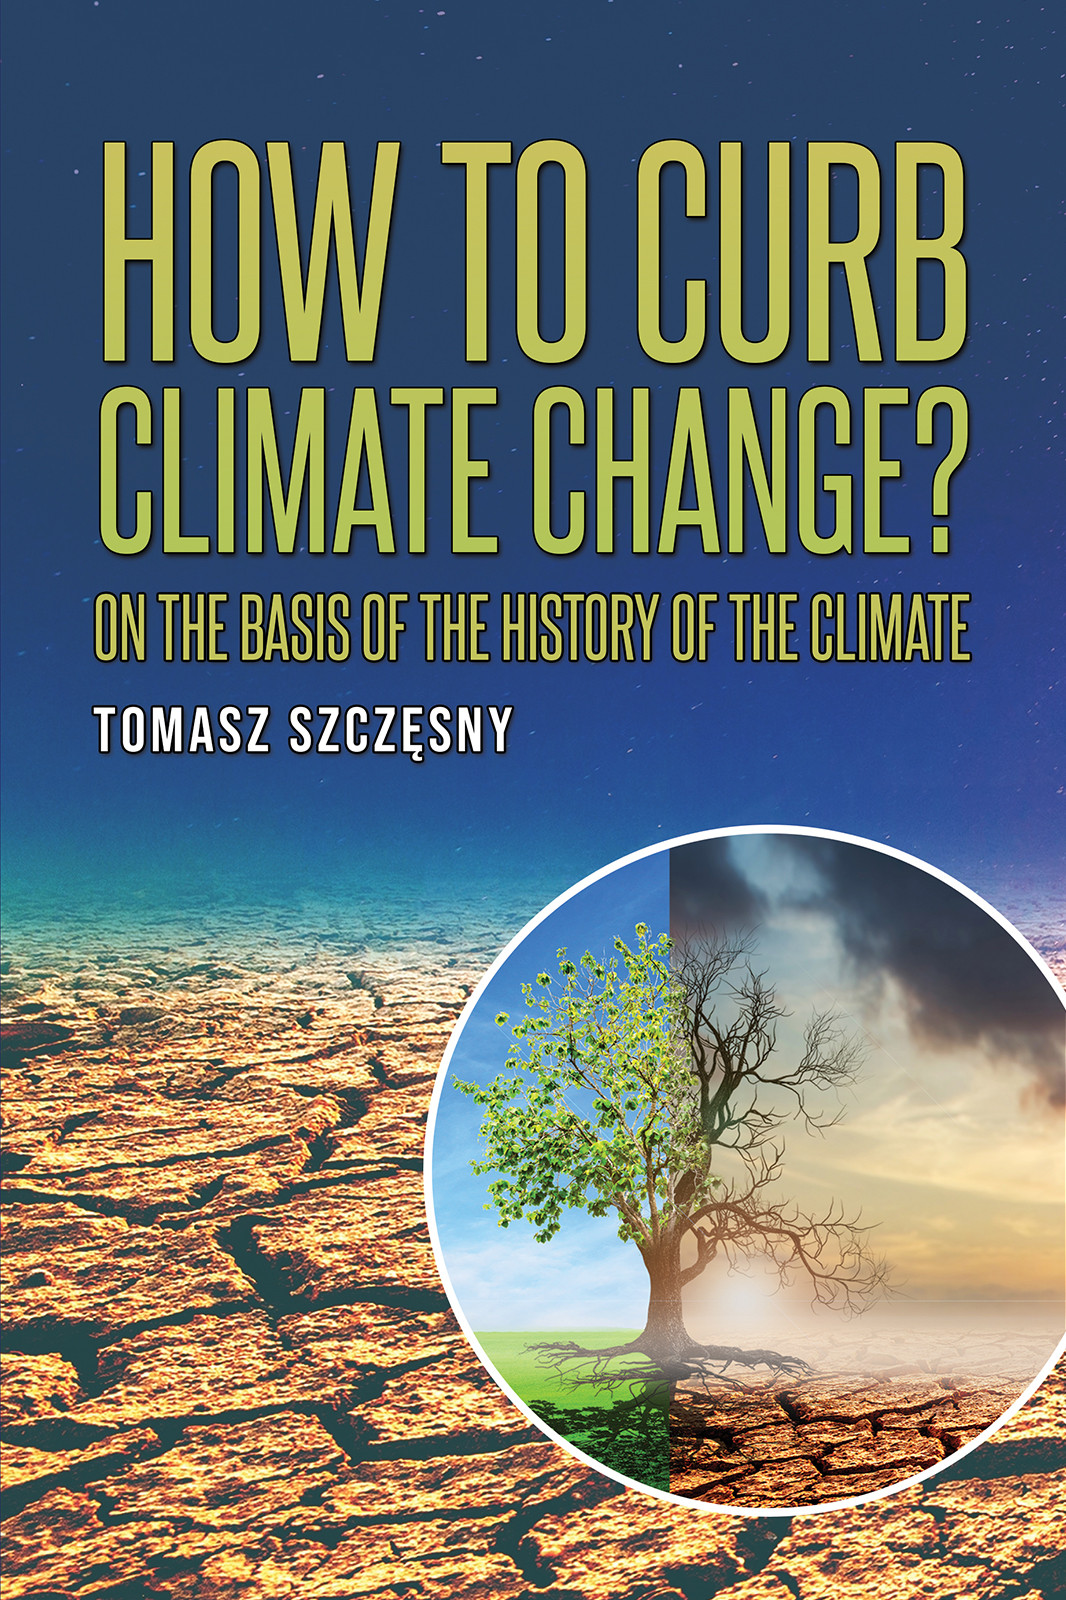 How to Curb Climate Change?-bookcover